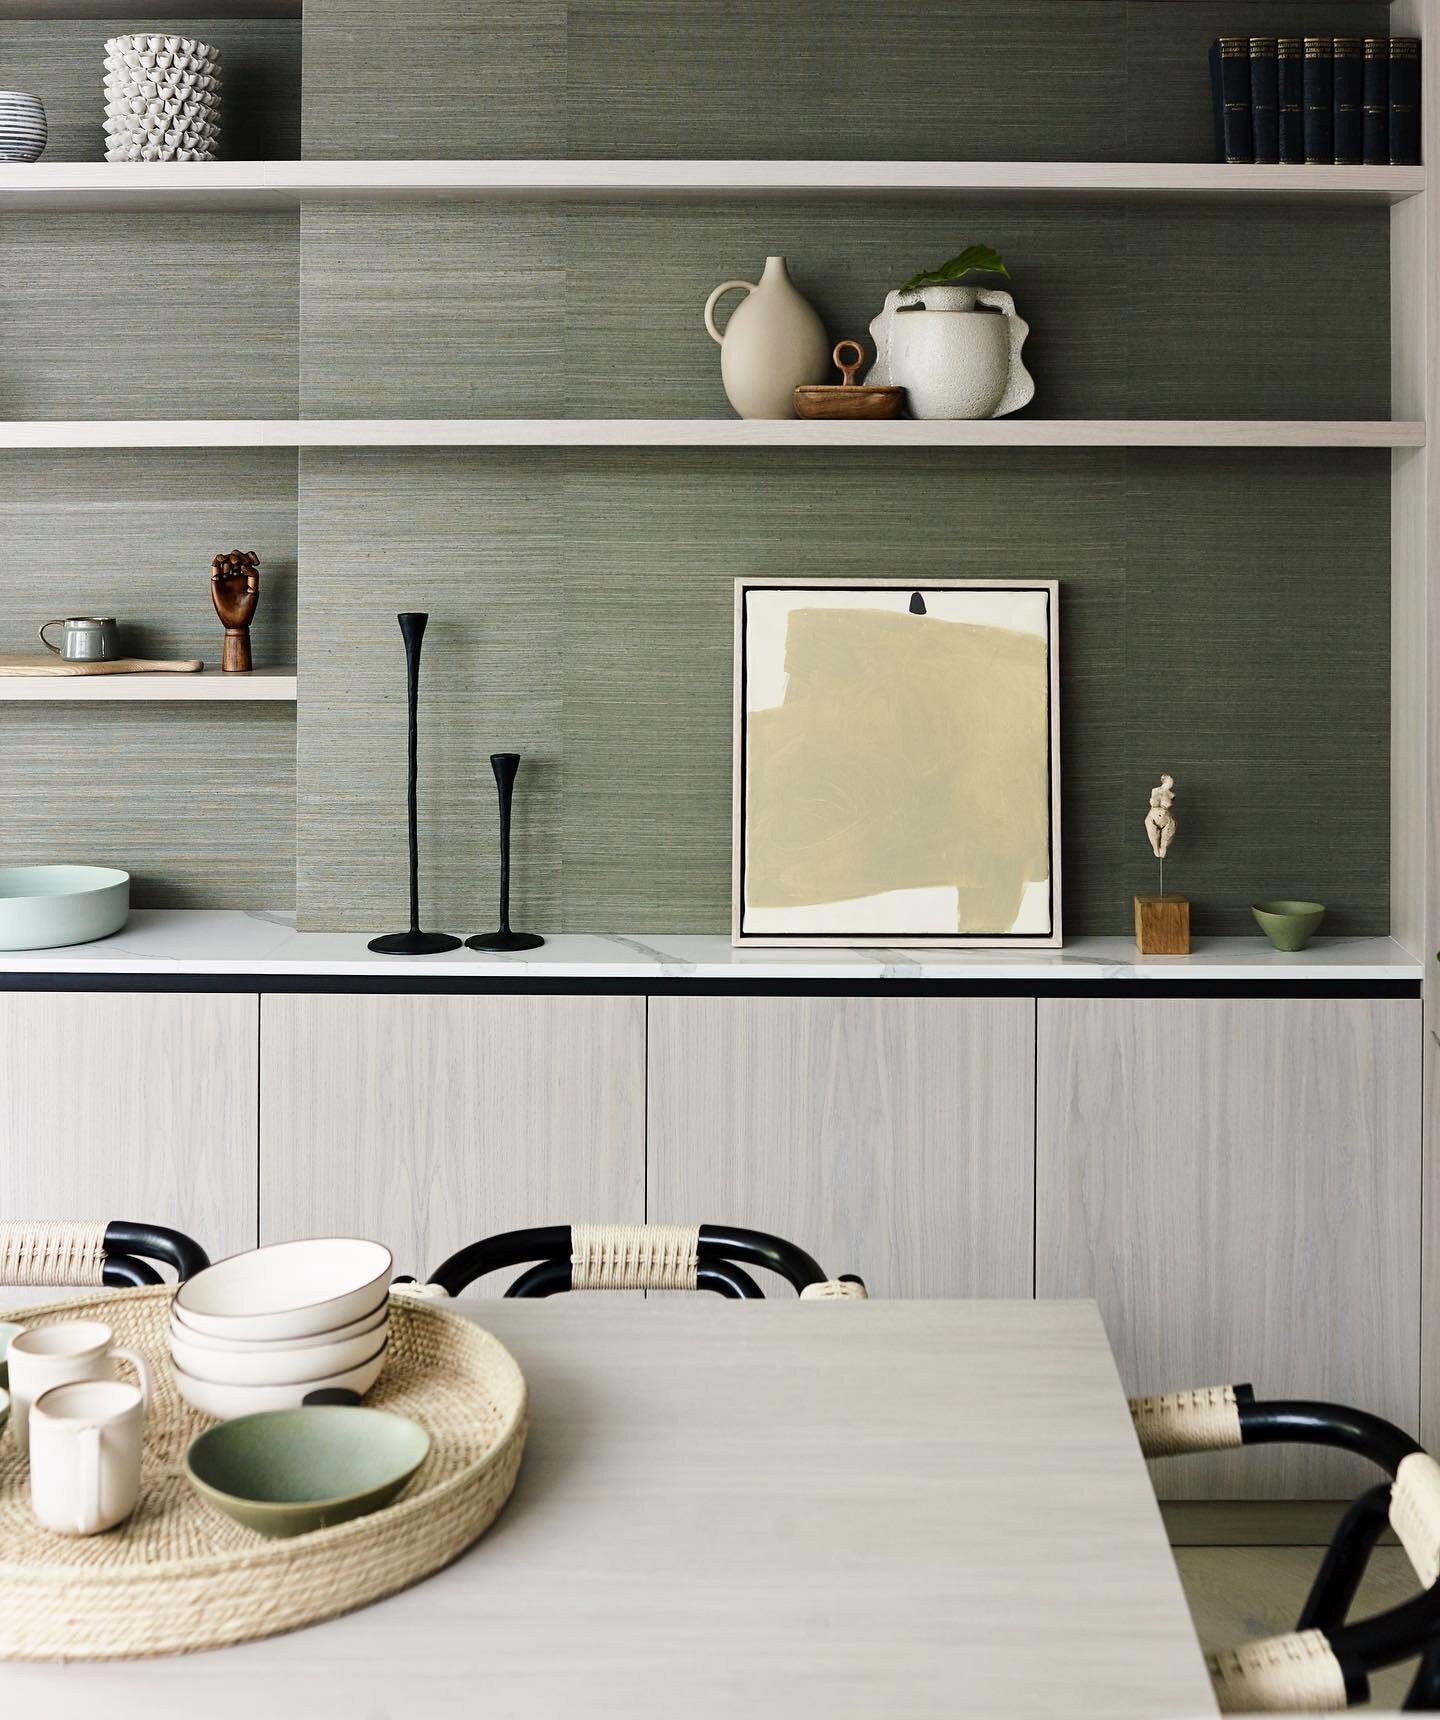 This morning, I was asked about my thoughts on grasscloth wallpaper, which we successfully used on the walls of an open-plan kitchen-diner in one of our Chelsea projects. Sharing is caring, so I thought I would reveal the benefits to you!

1. Unlike 